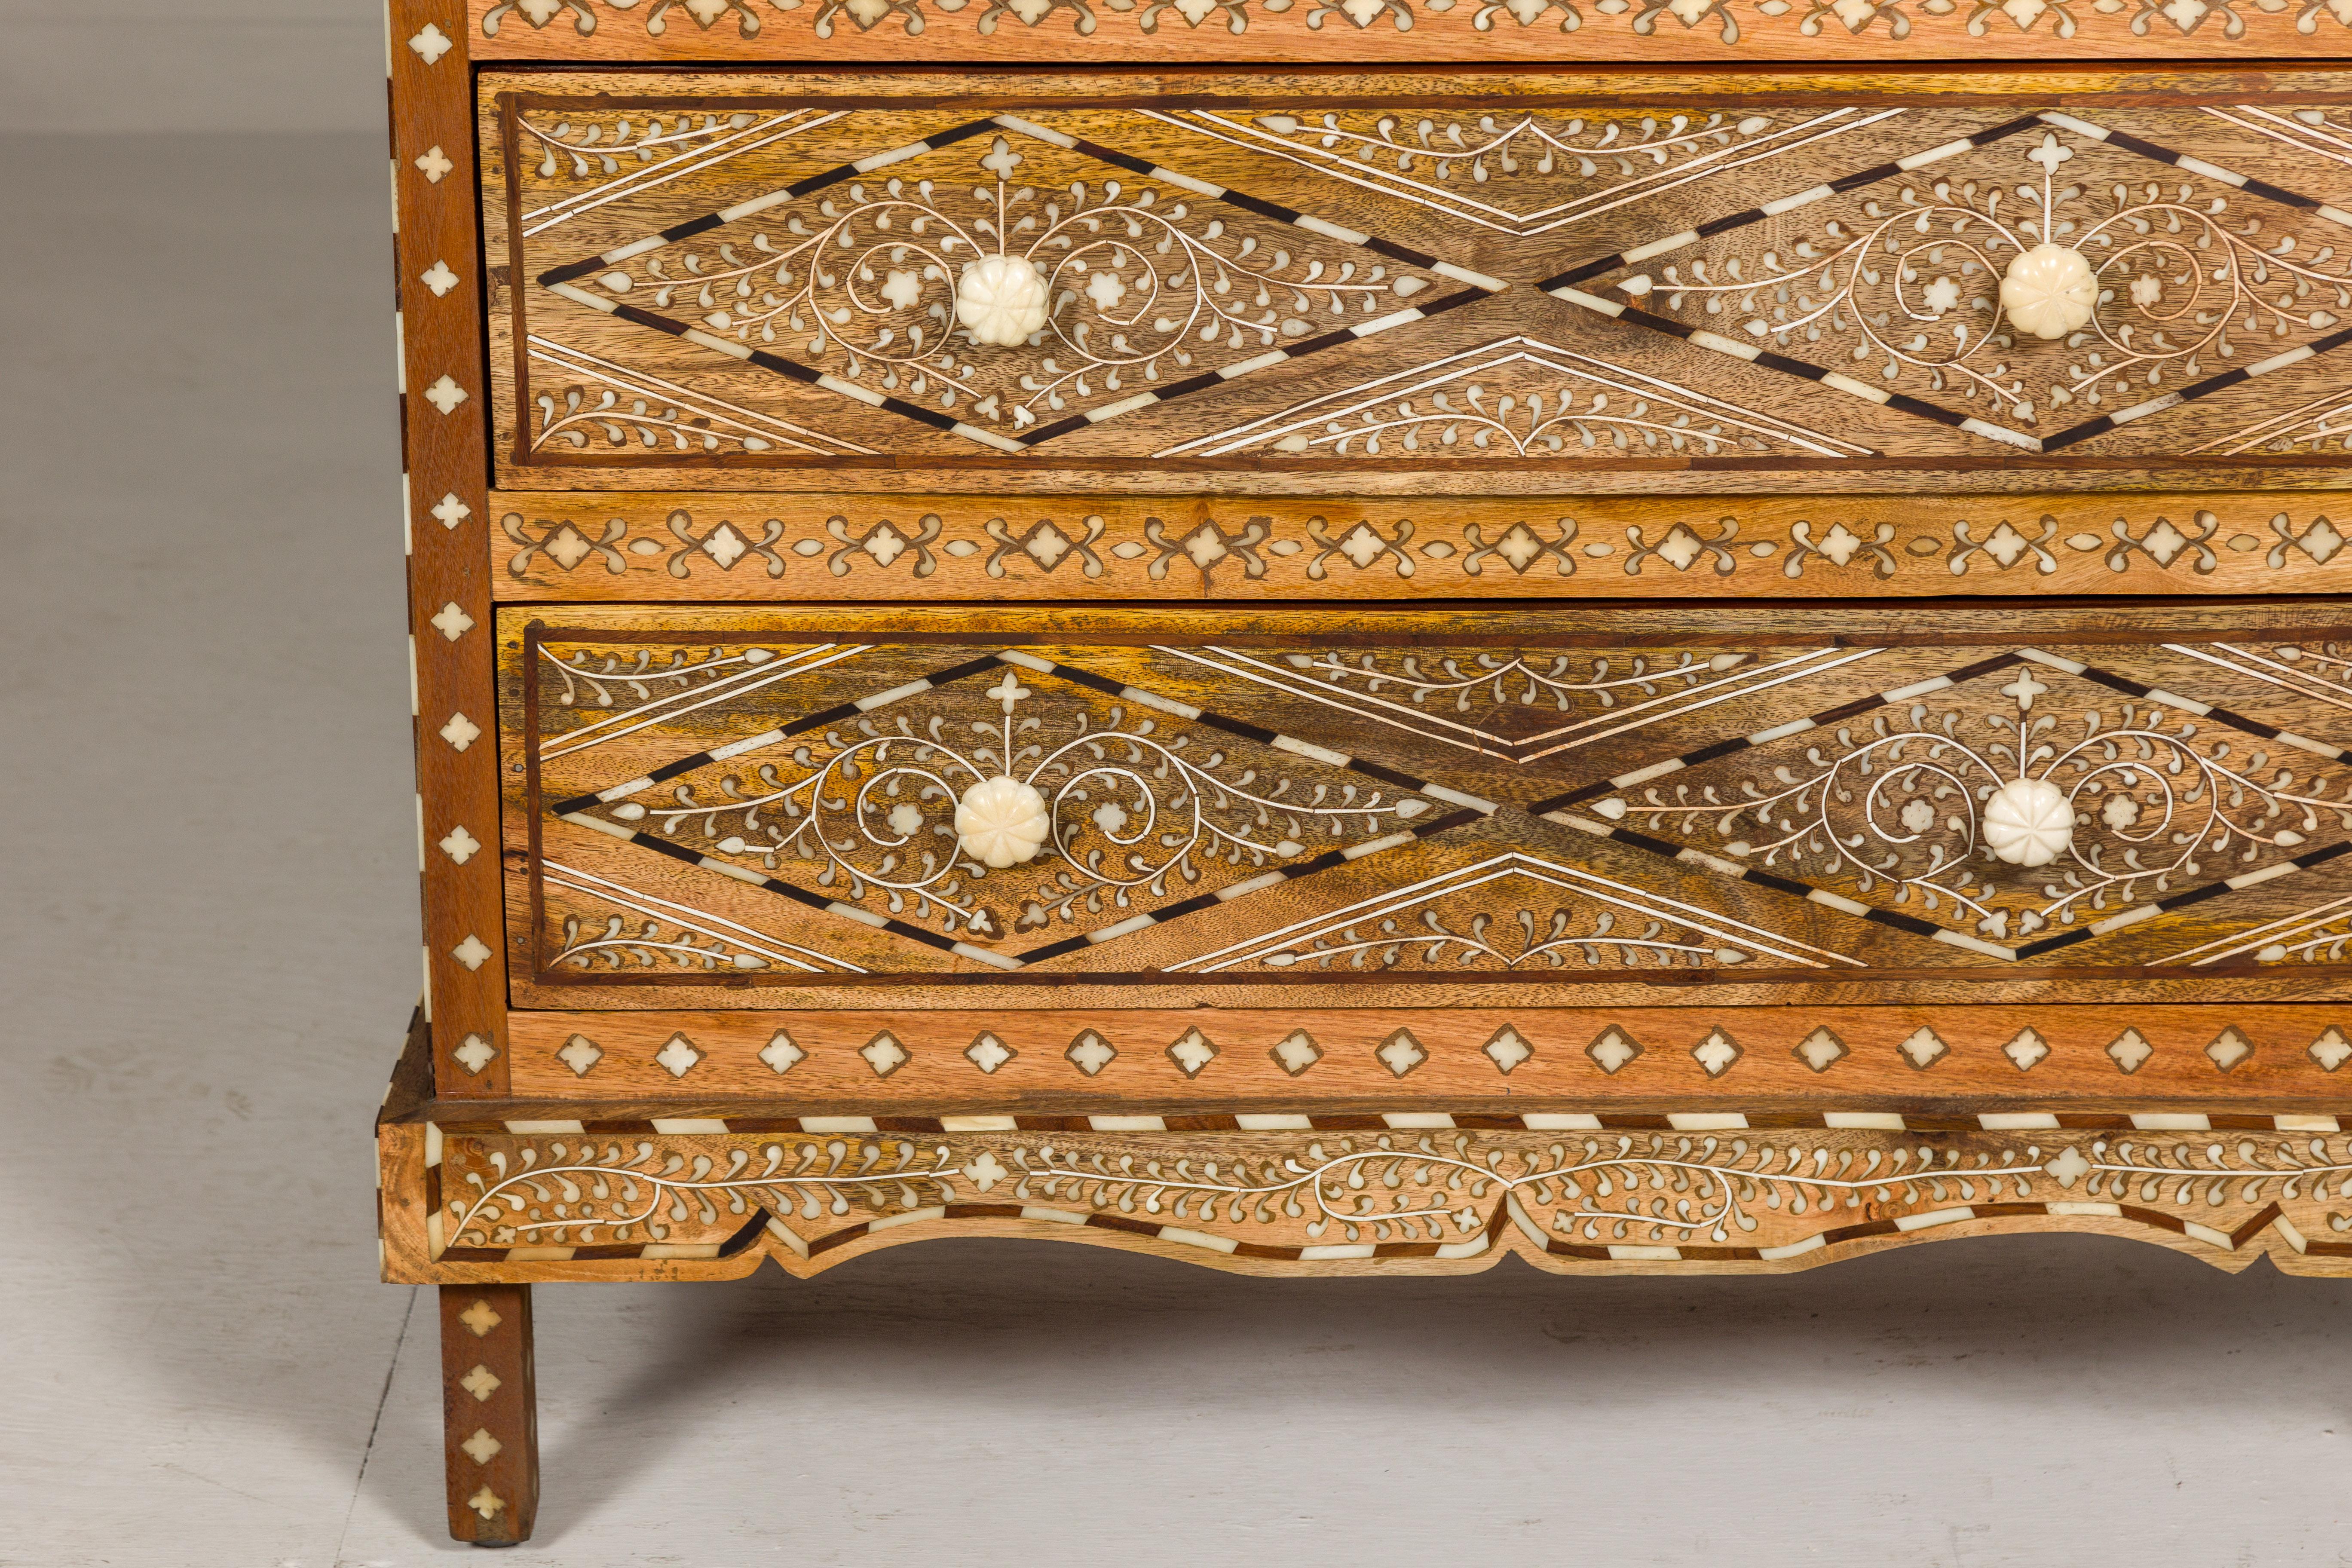 Anglo-Indian Style Mango Wood Four-Drawer Chest with Foliage Themed Bone Inlay In Excellent Condition For Sale In Yonkers, NY